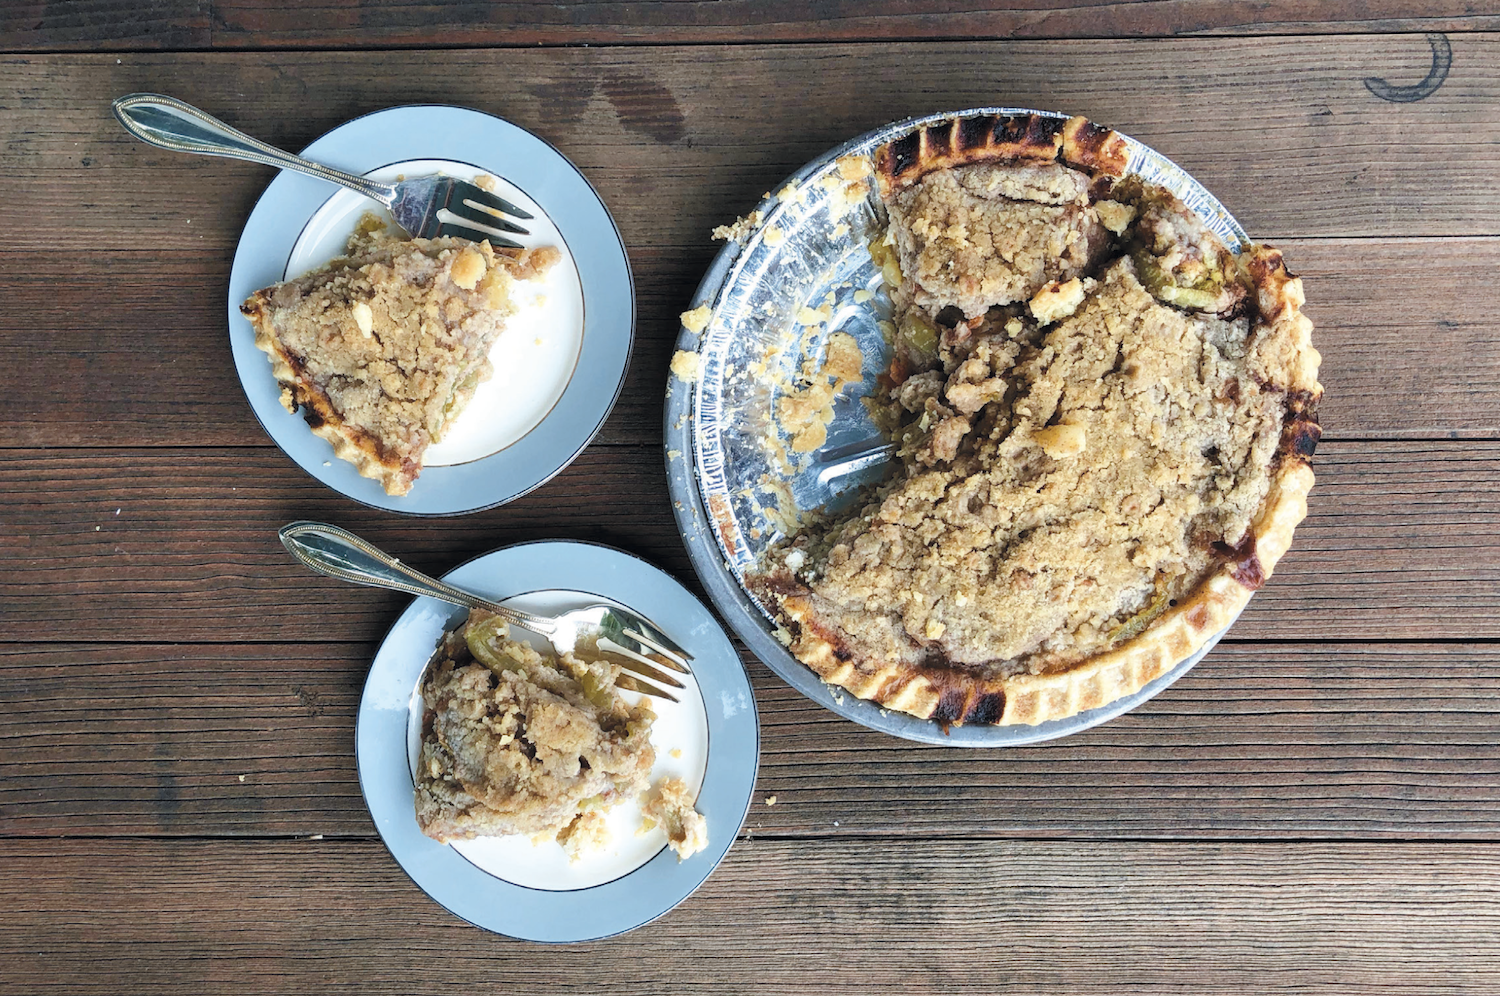 Fried green tomato pie is an exciting way to use up a Central New York bumper crop.